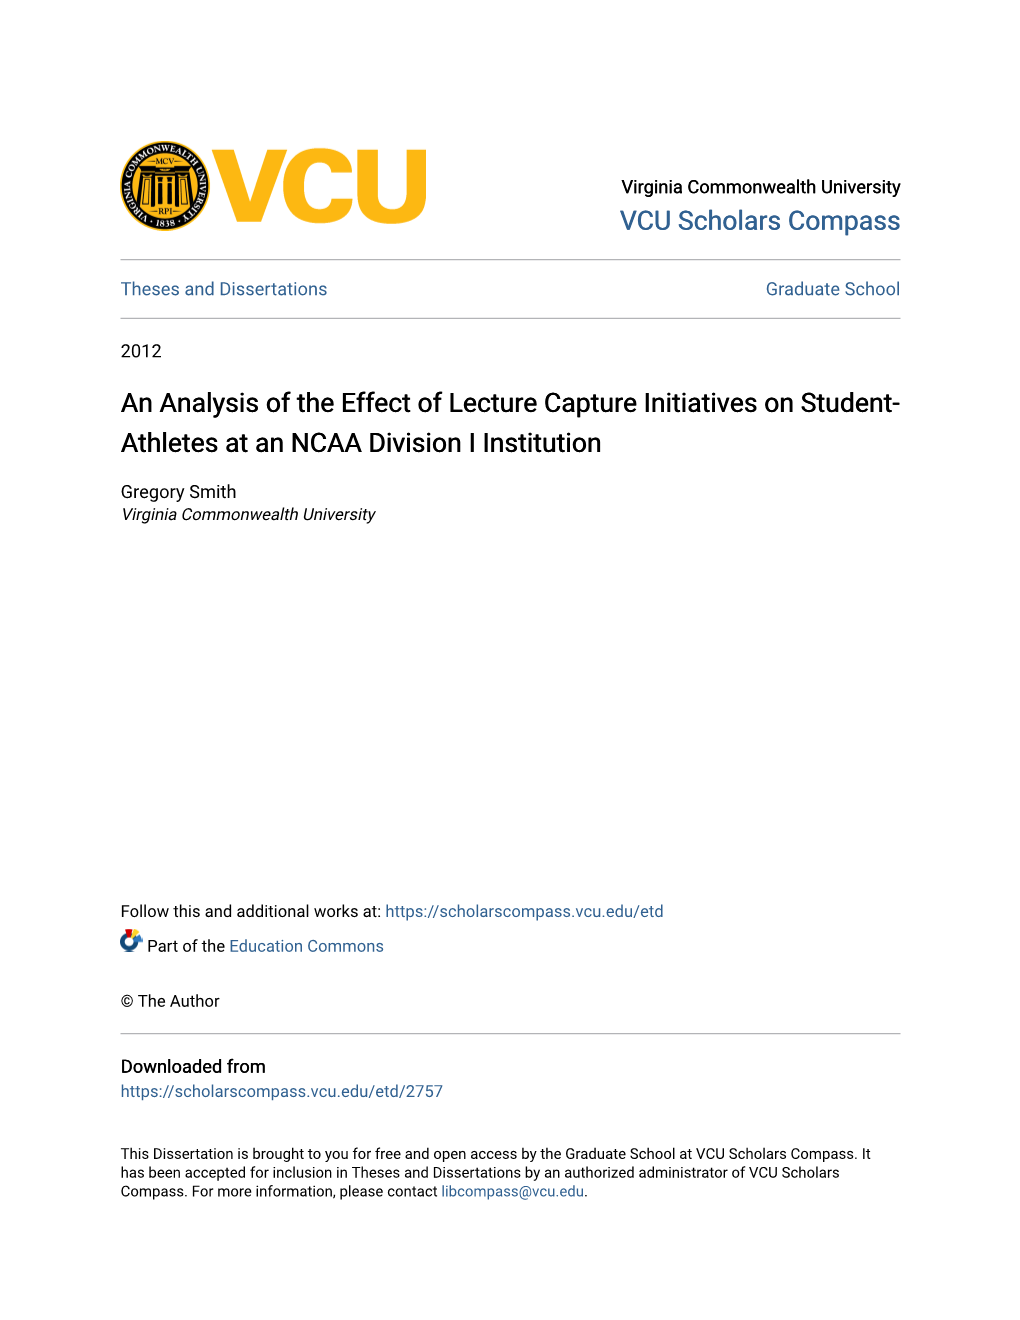 An Analysis of the Effect of Lecture Capture Initiatives on Student- Athletes at an NCAA Division I Institution